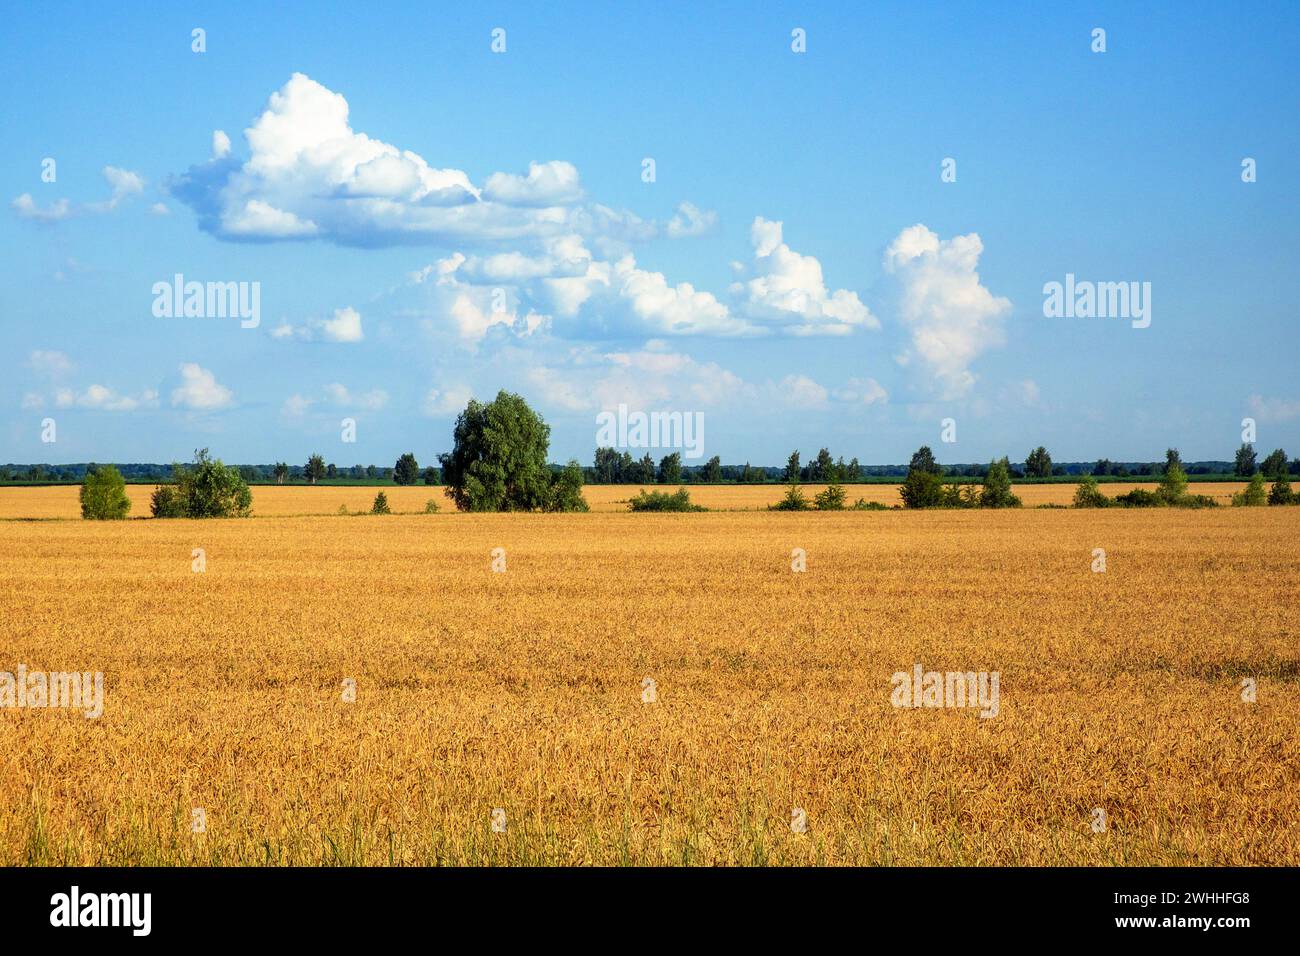 A vast field of mature wheat with distant trees and a blue sky. Stock Photo